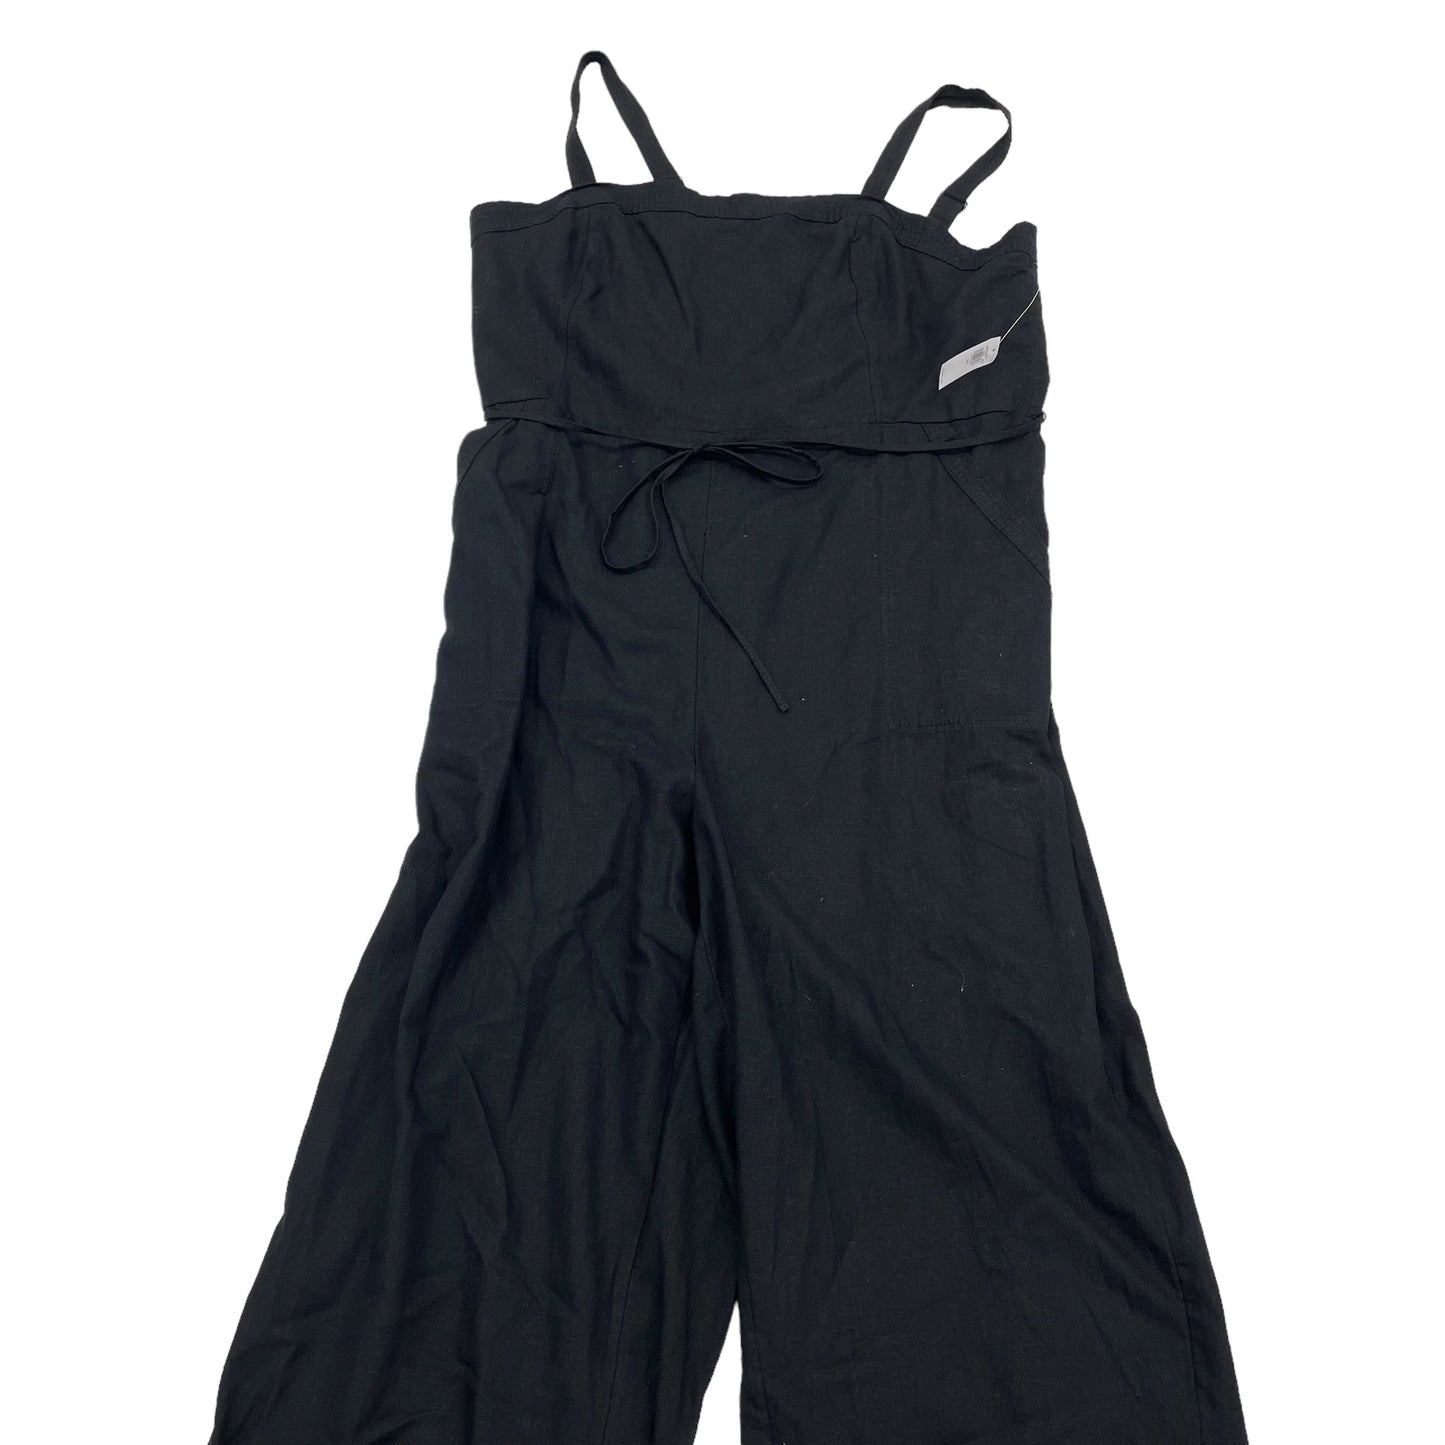 BLACK JUMPSUIT by OLD NAVY Size:2X